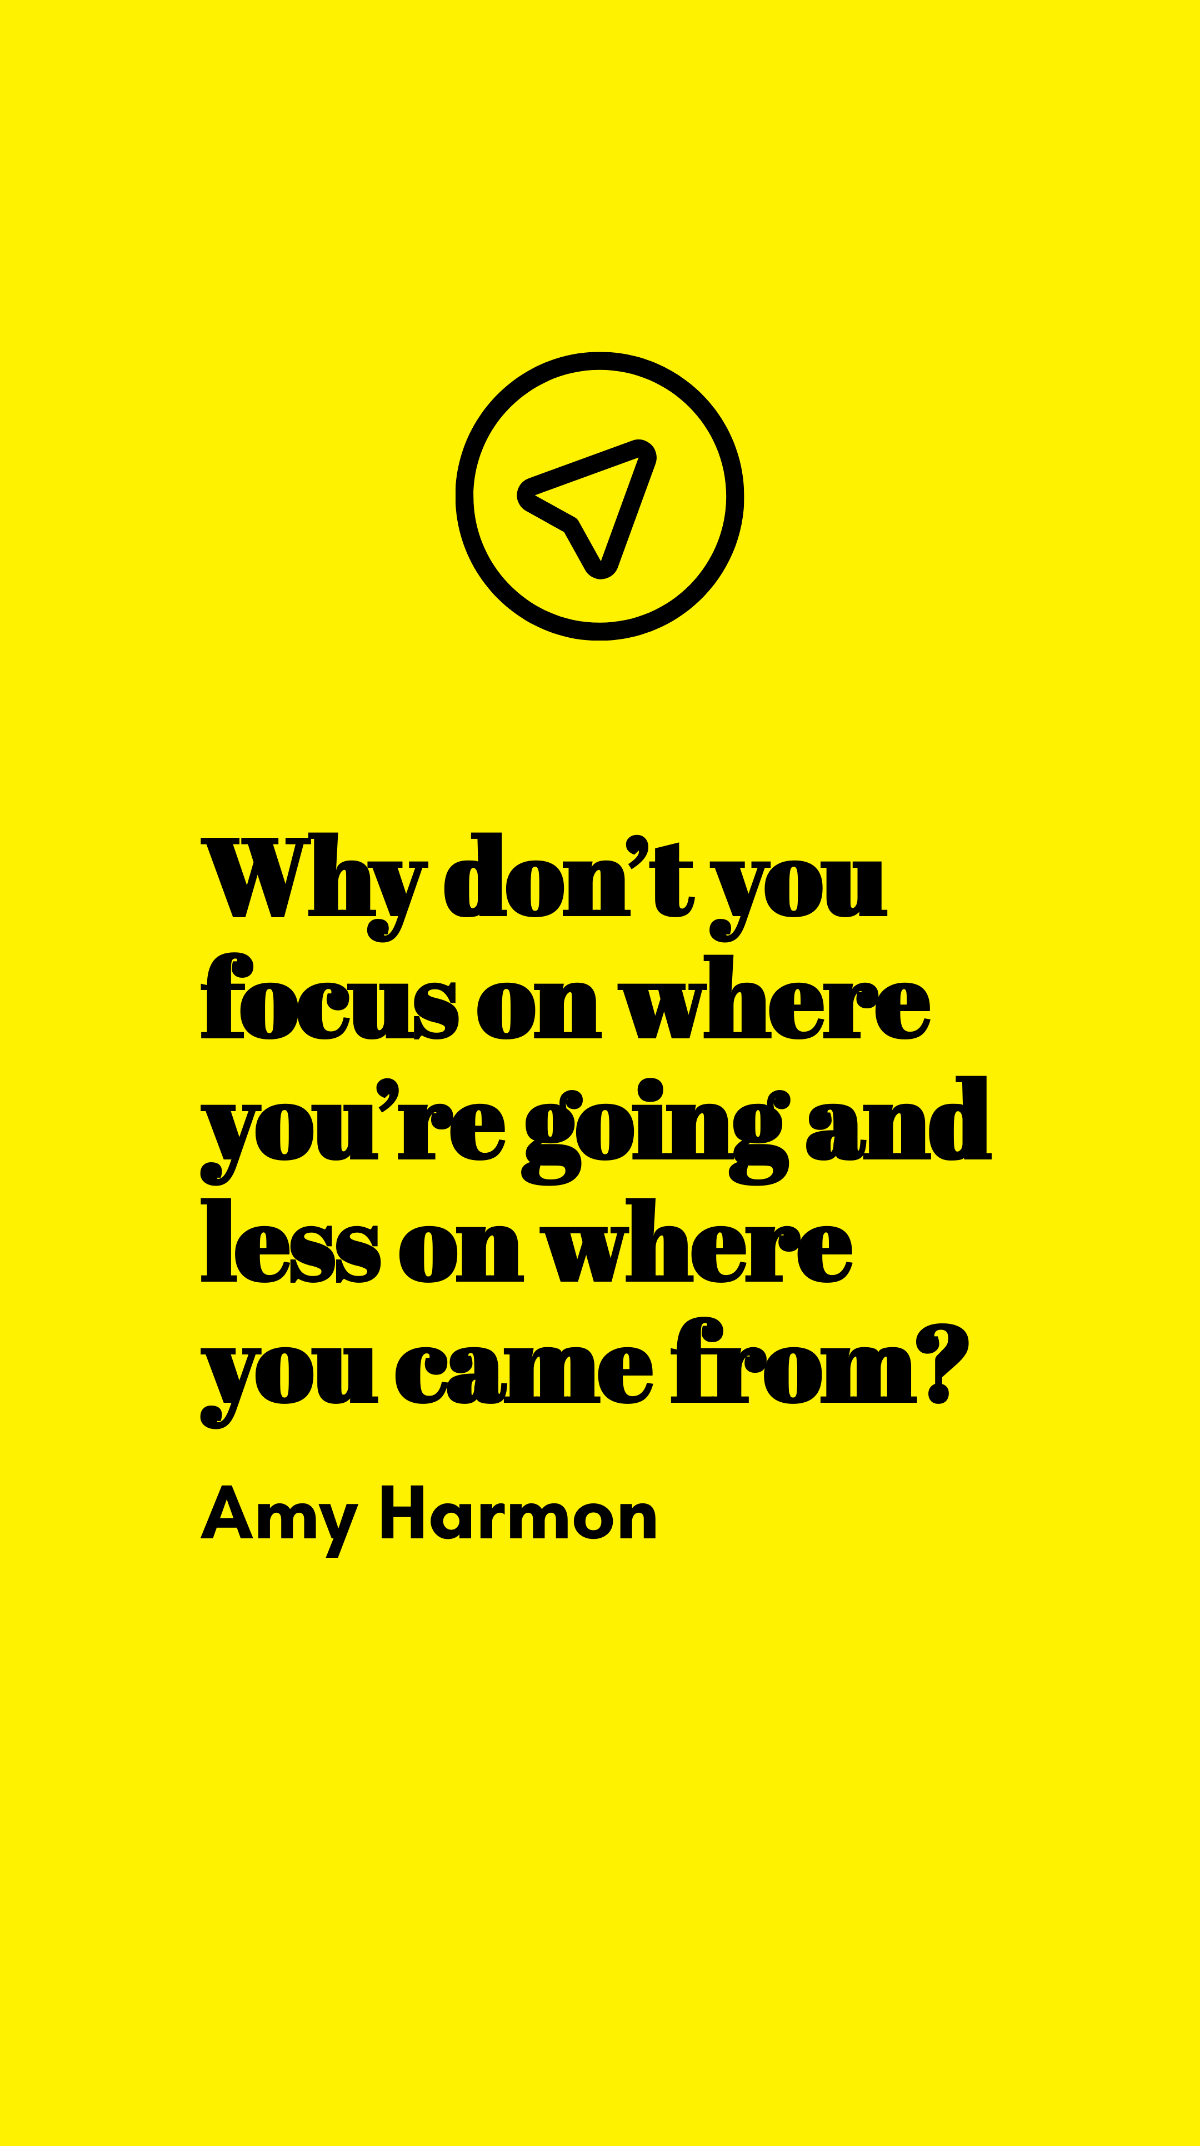 Amy Harmon - Why don’t you focus on where you’re going and less on where you came from? Template